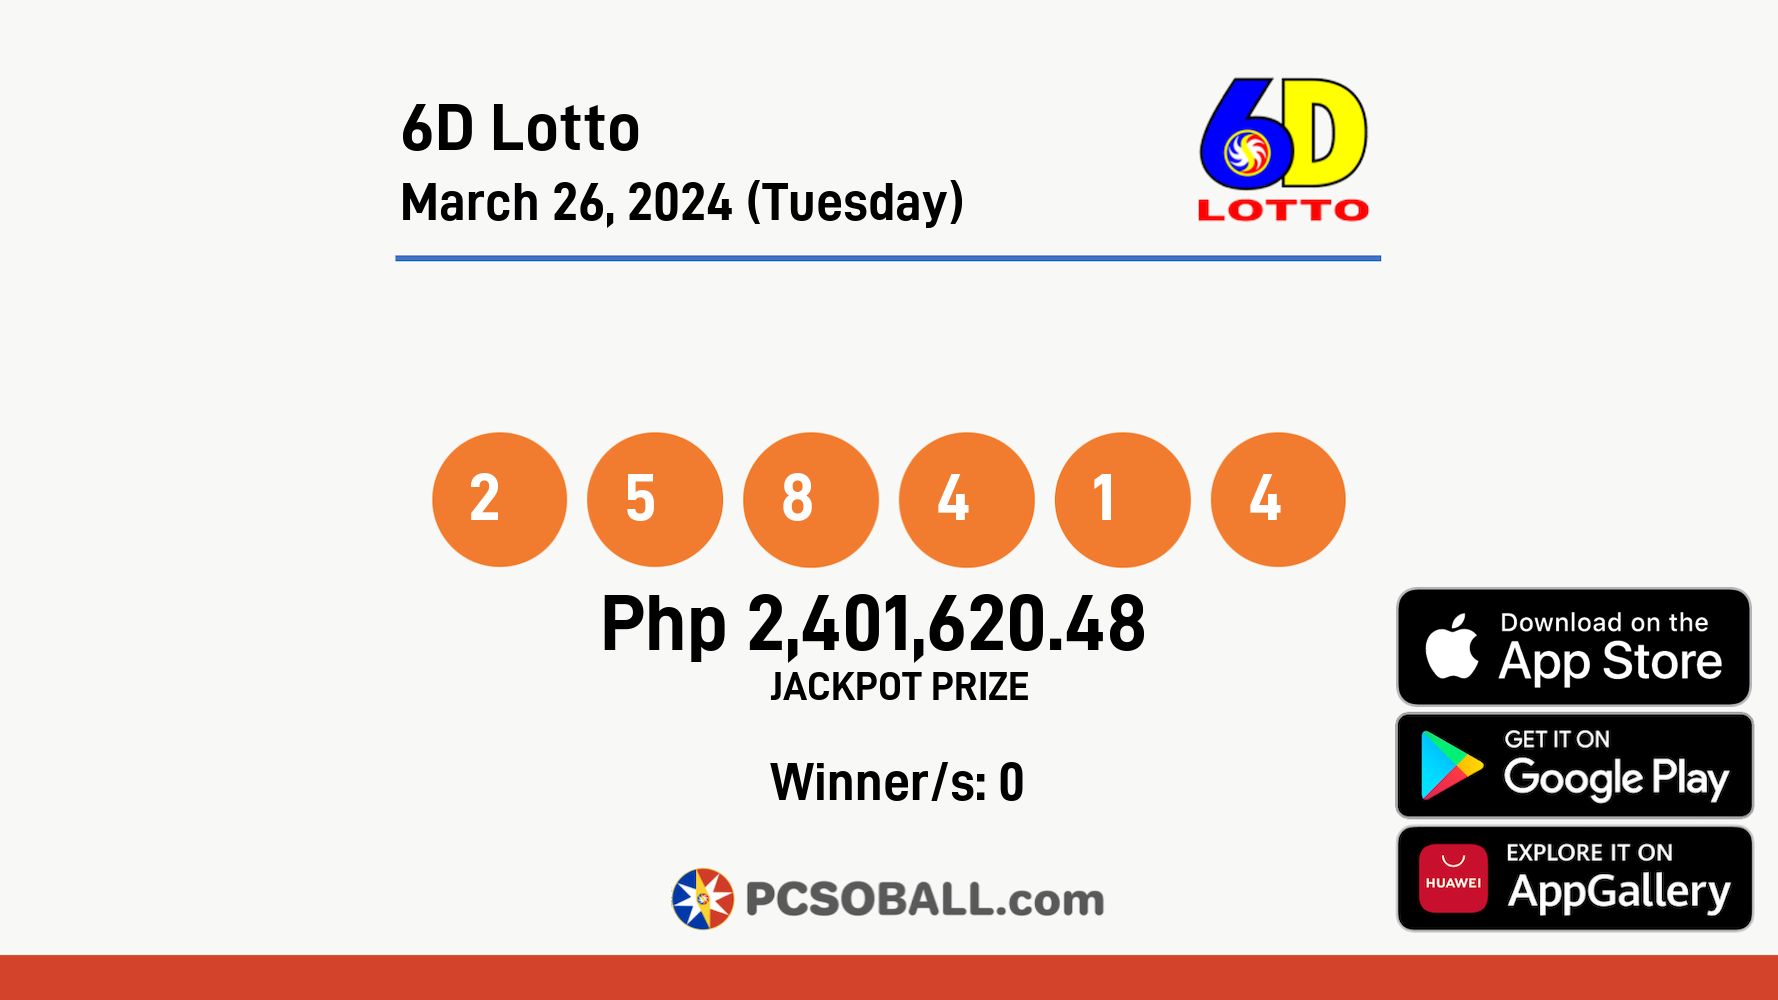 6D Lotto March 26, 2024 (Tuesday) Result